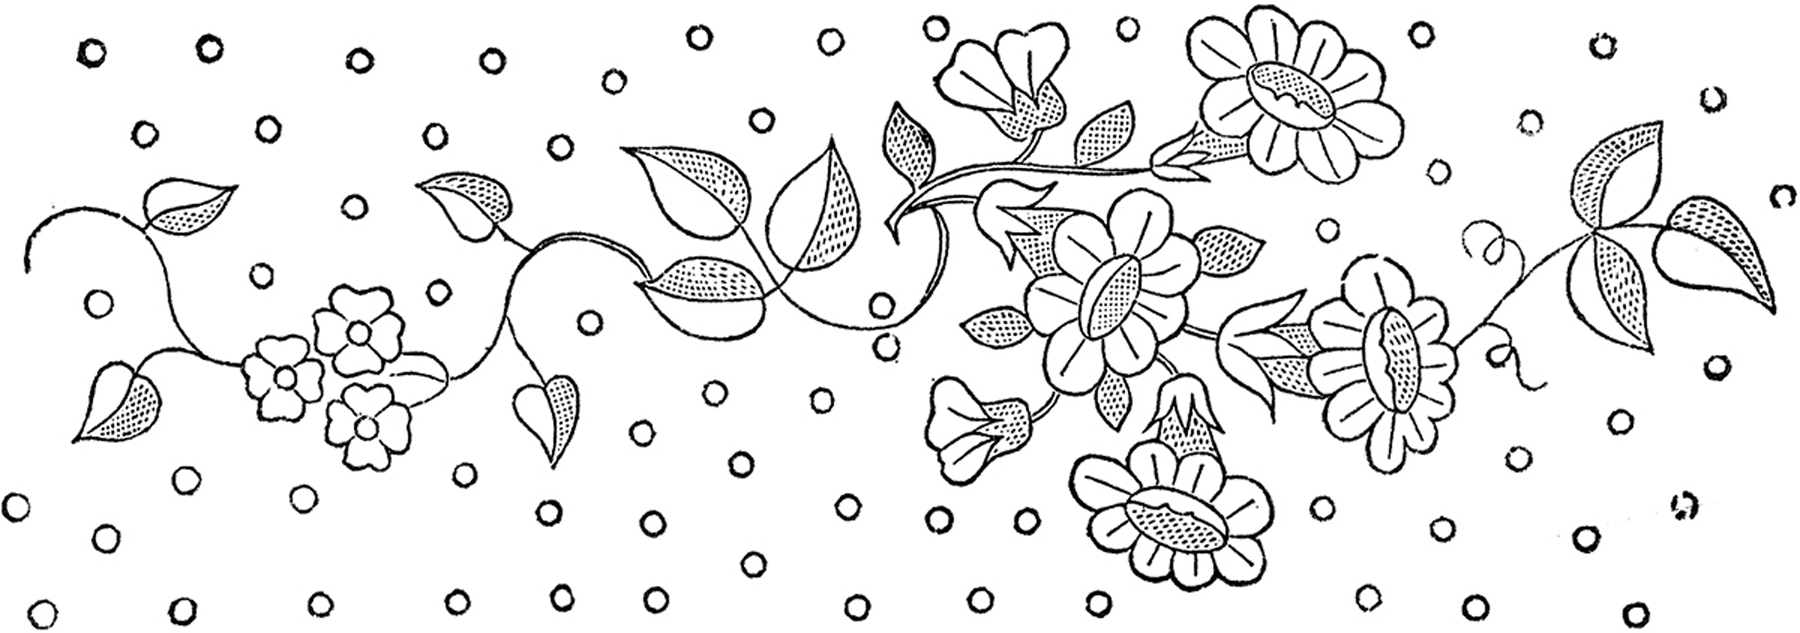 Victorian Embroidery Patterns Floral Embroidery Patterns Pretty The Graphics Fairy